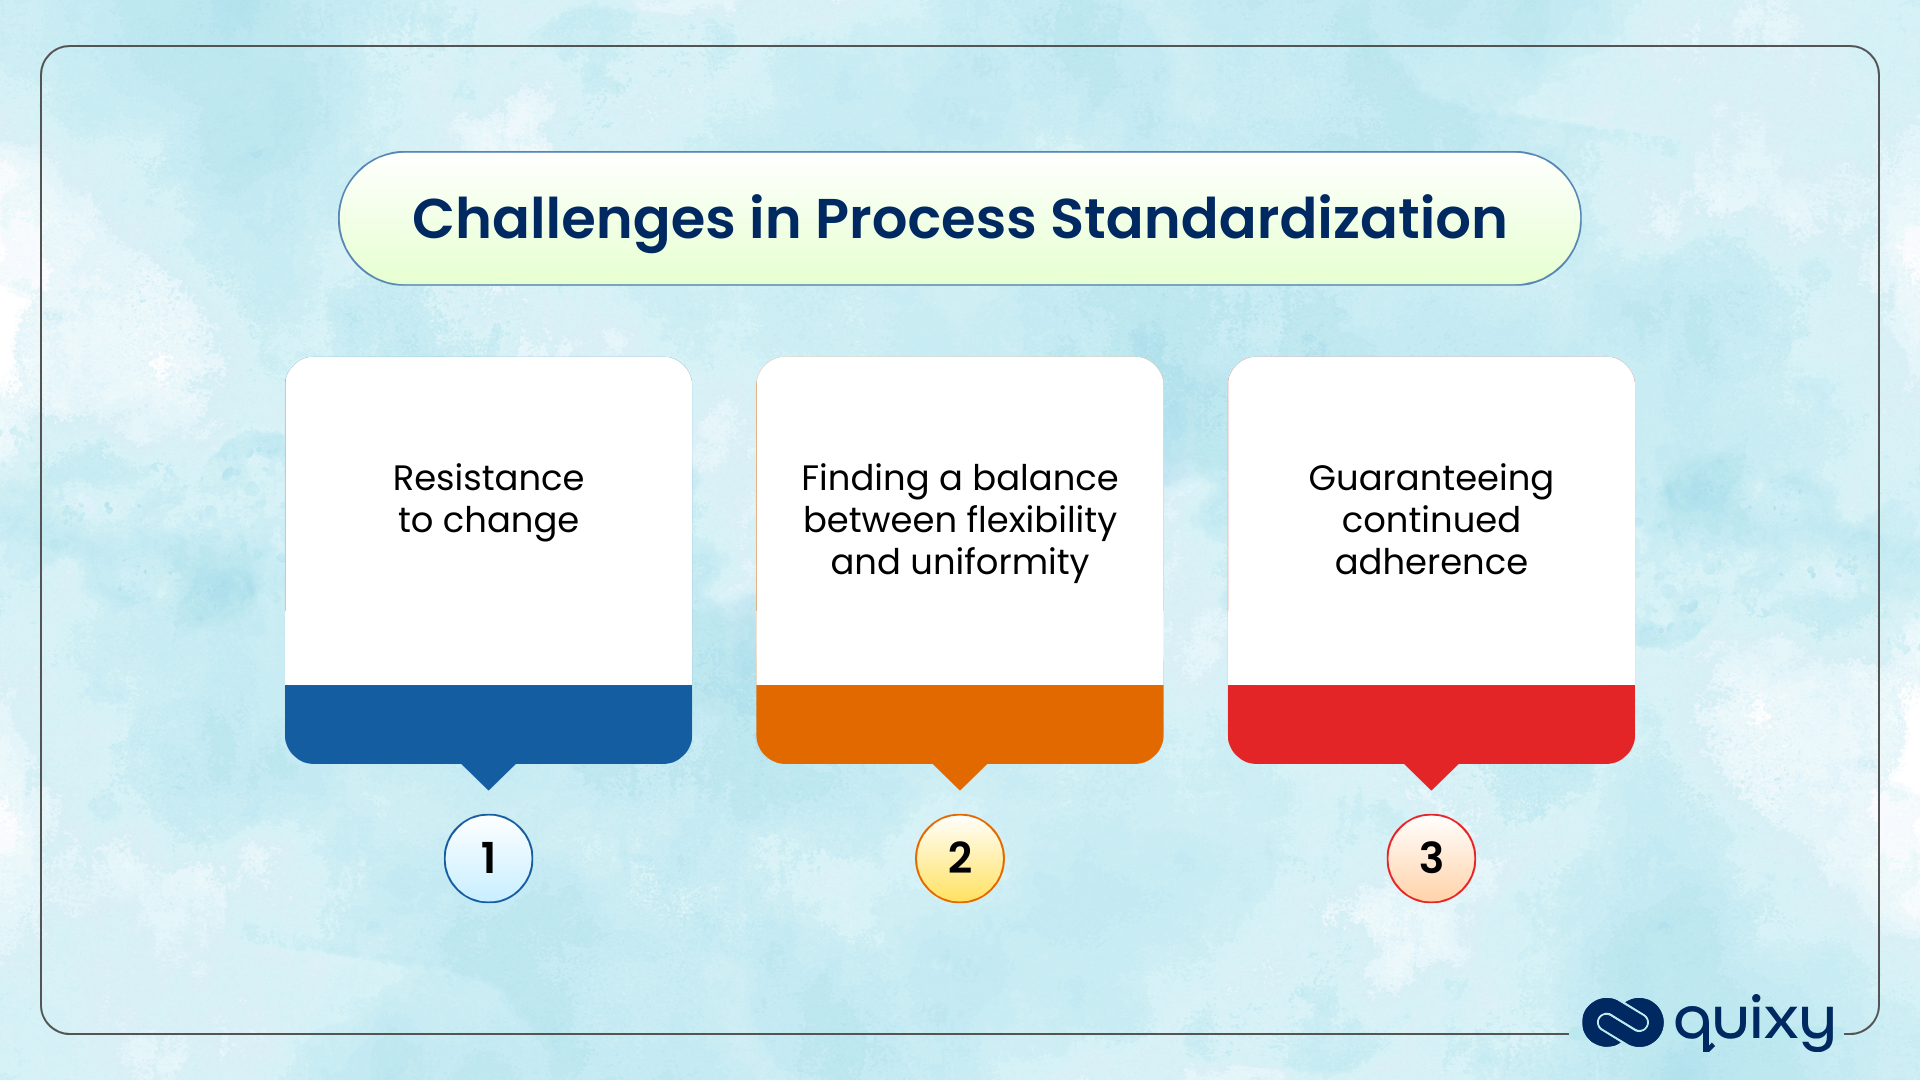 Challenges in Process Standardization